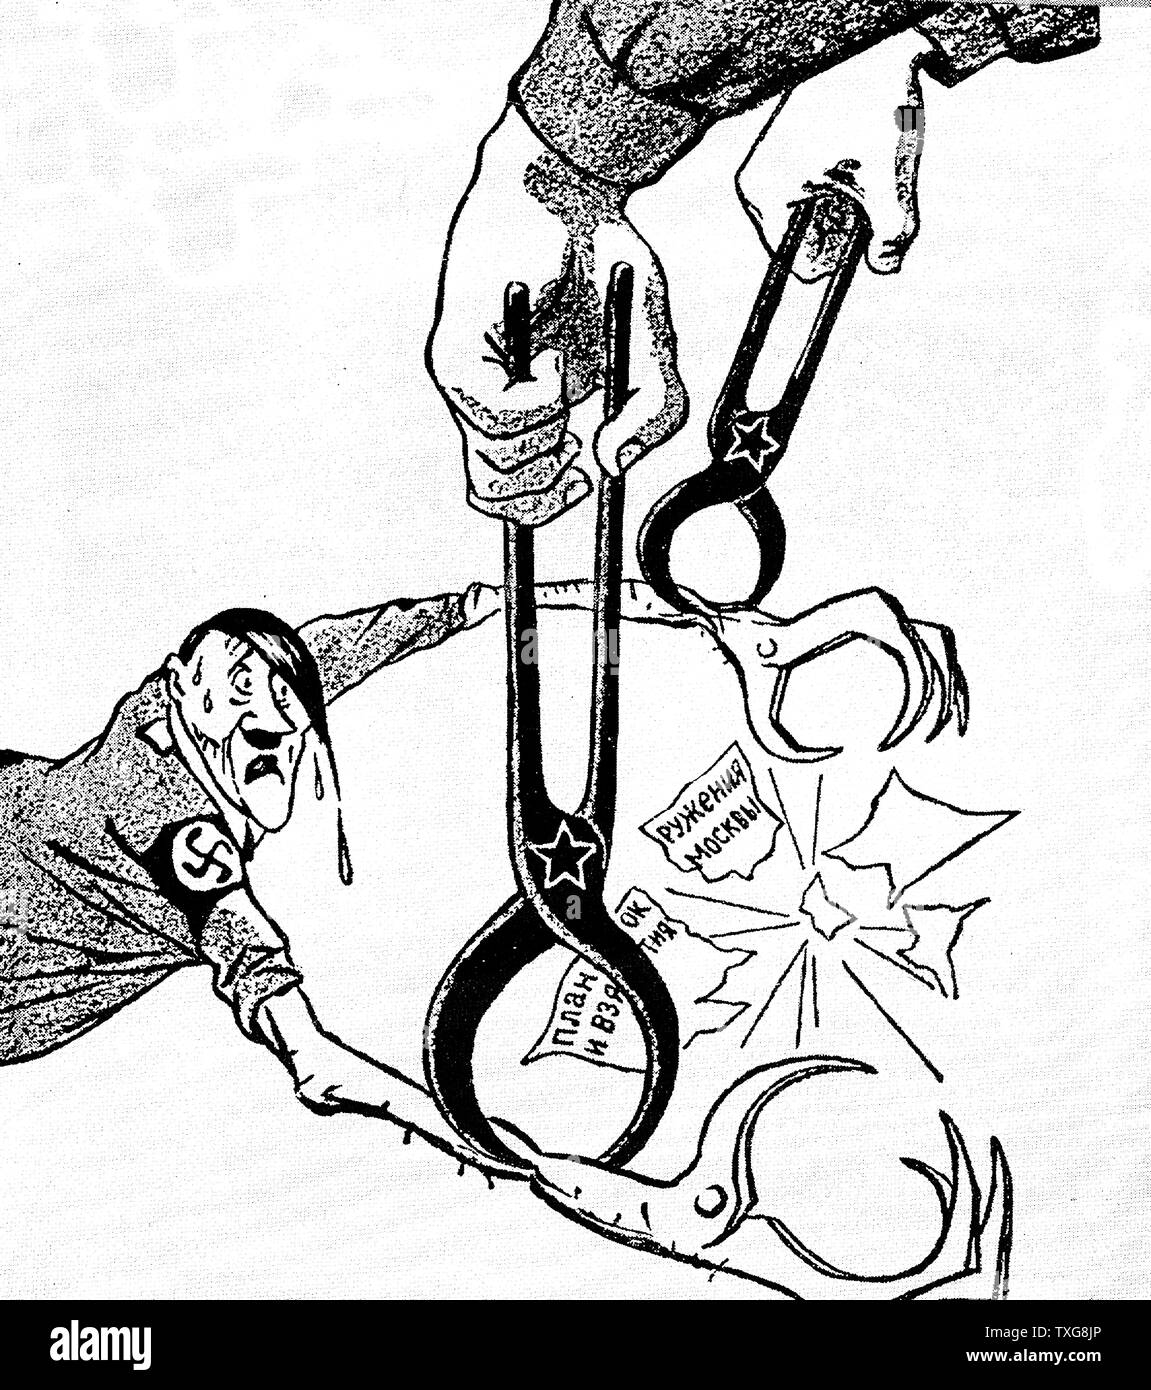 World War II: Operation Barbarossa, German invasion of USSR, launched June 1941. Russian cartoon, showing that Soviet pincers could stop Hitler's own pincer movements planned to grasp Russian territory Stock Photo